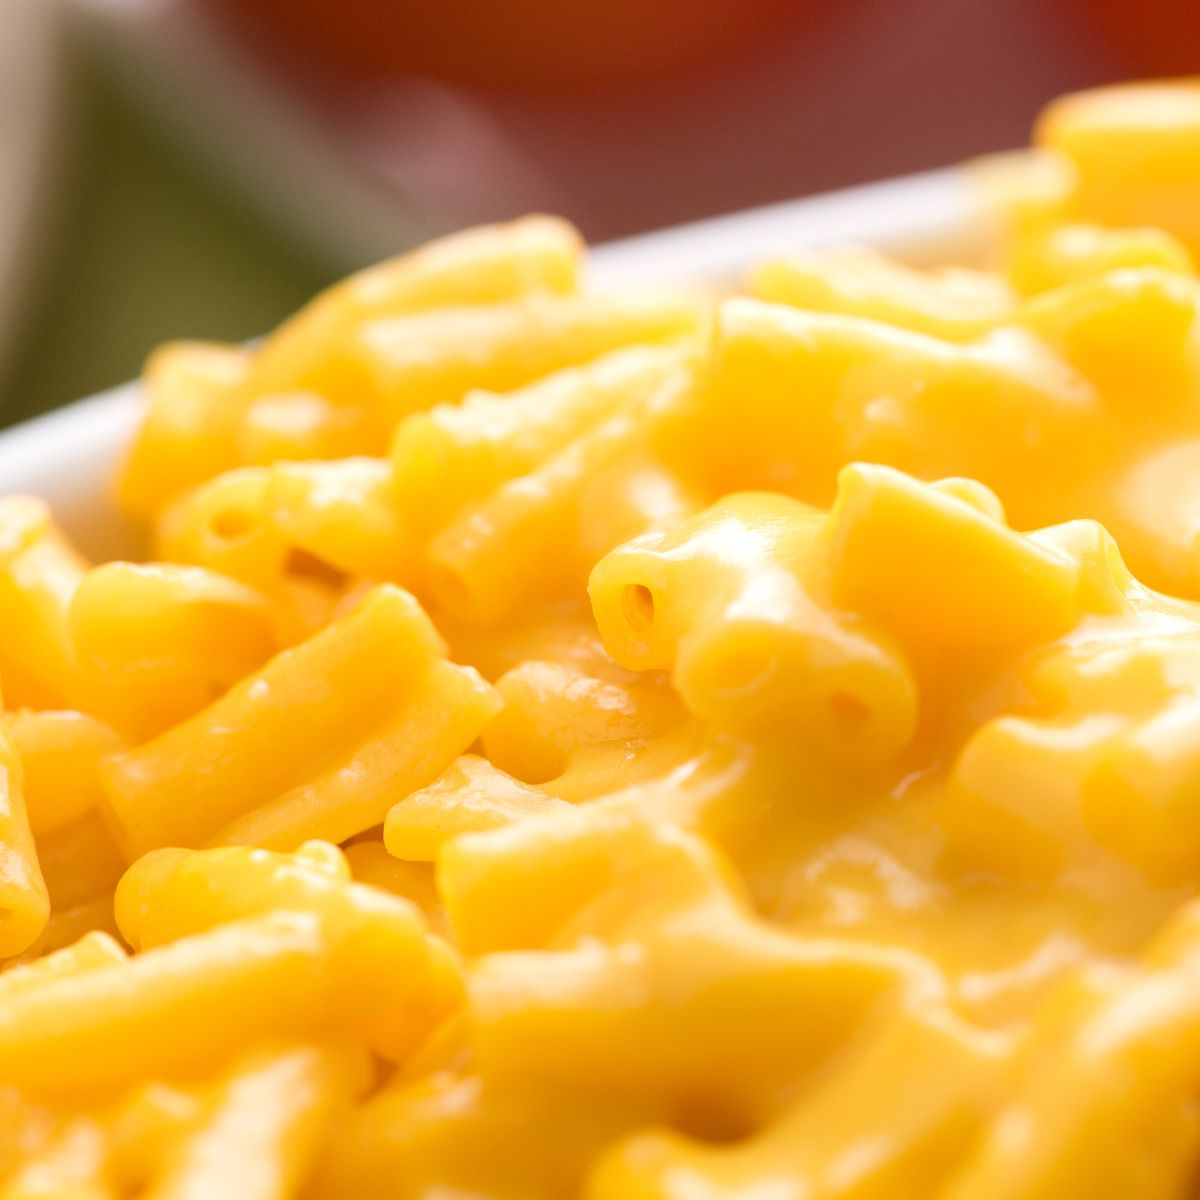 Orange and cheesey macaroni and cheese in a white bowl